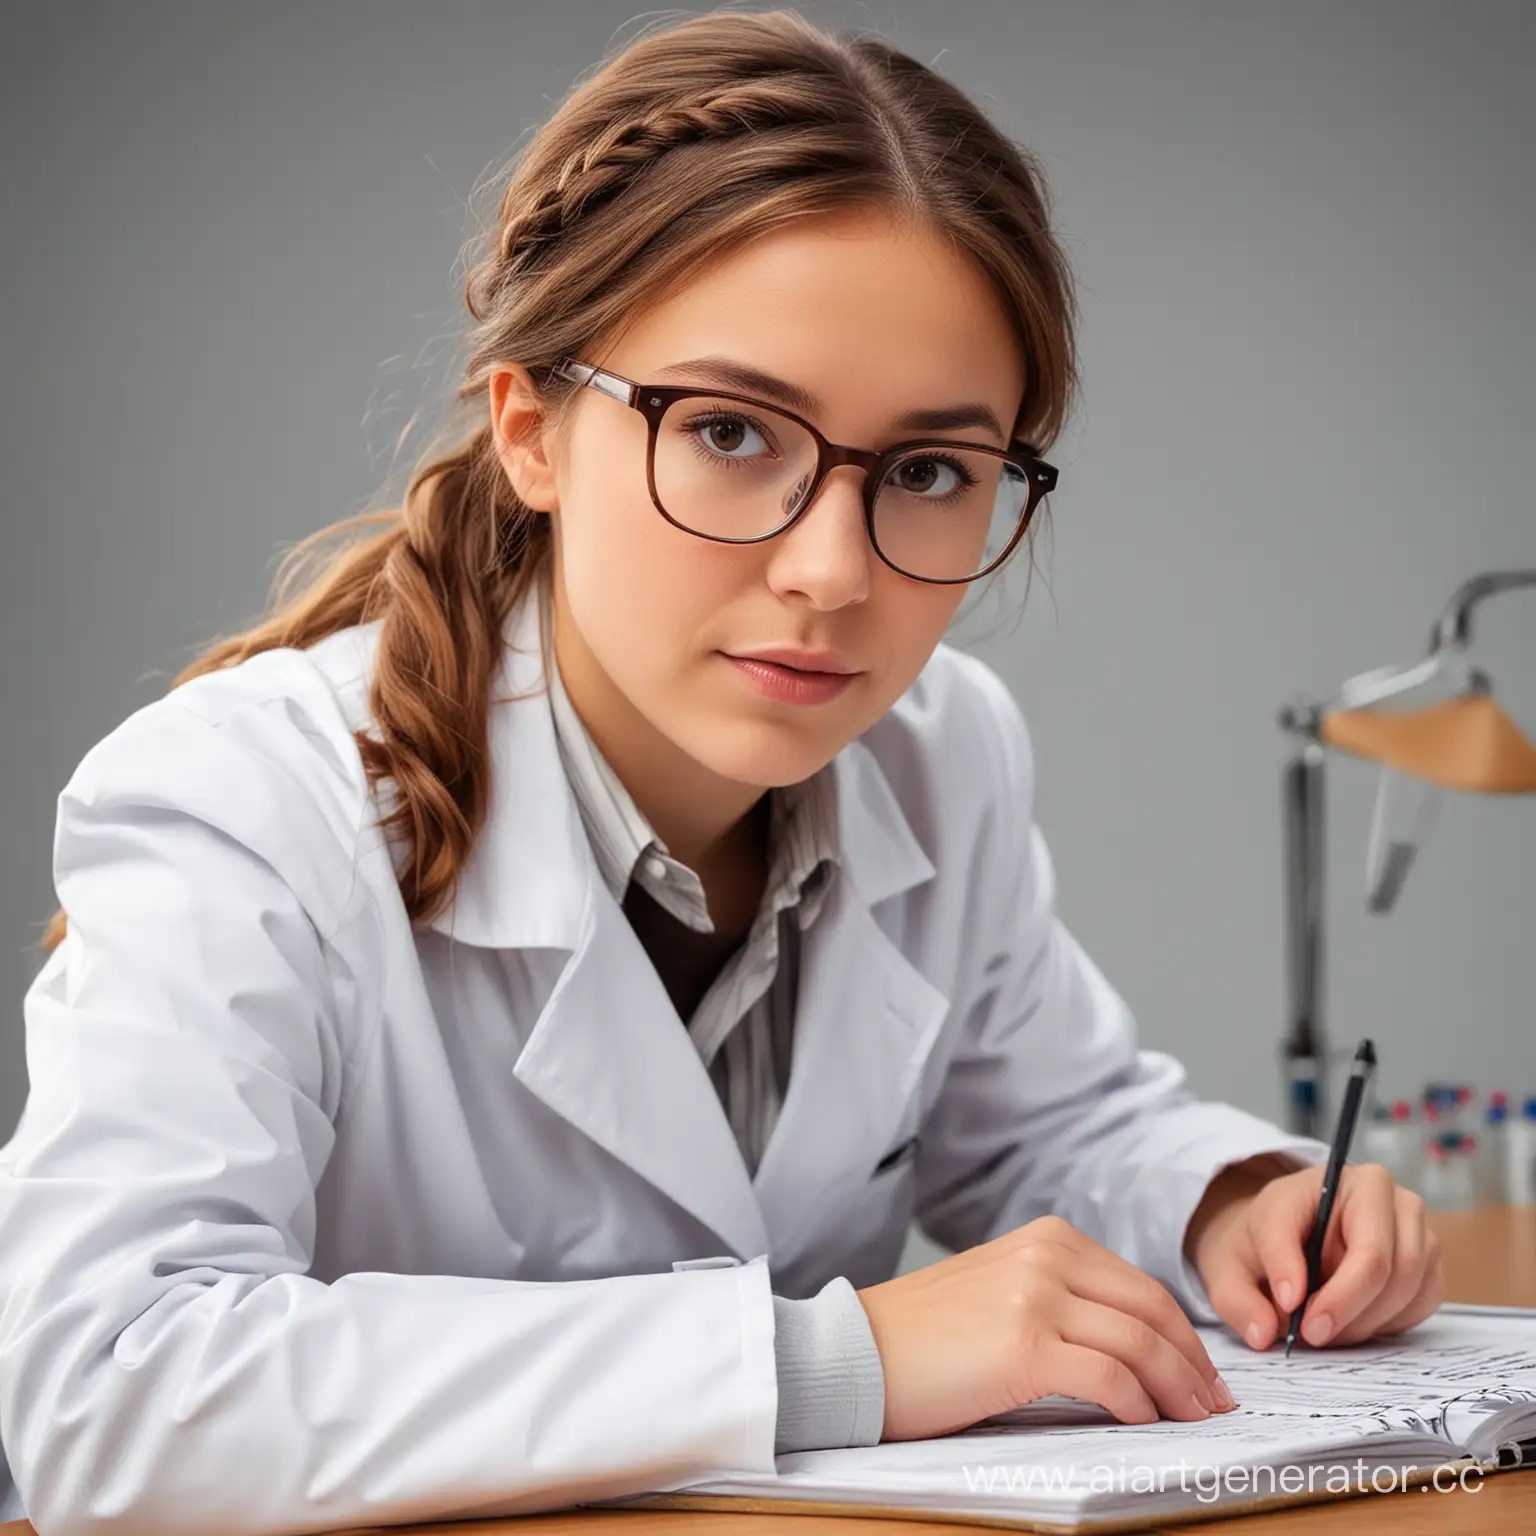 A brown-haired scientist with a pigtail in a white coat and glasses is sitting at a table